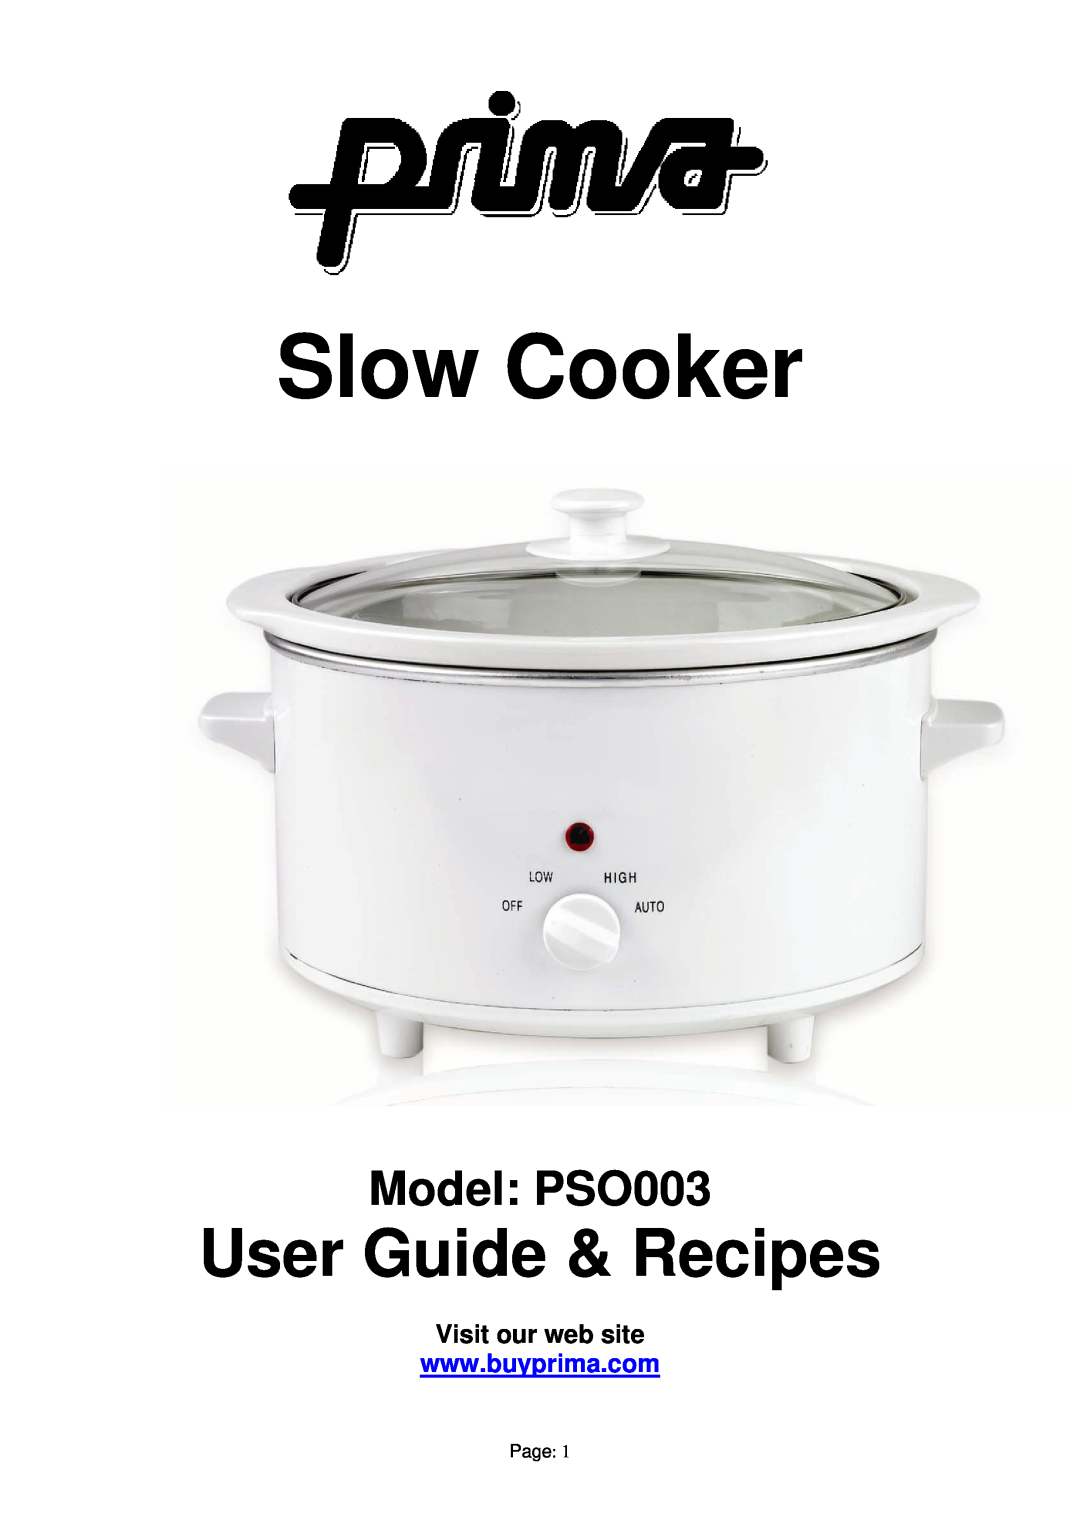 Prima manual Visit our web site, Slow Cooker, User Guide & Recipes, Model PSO003 